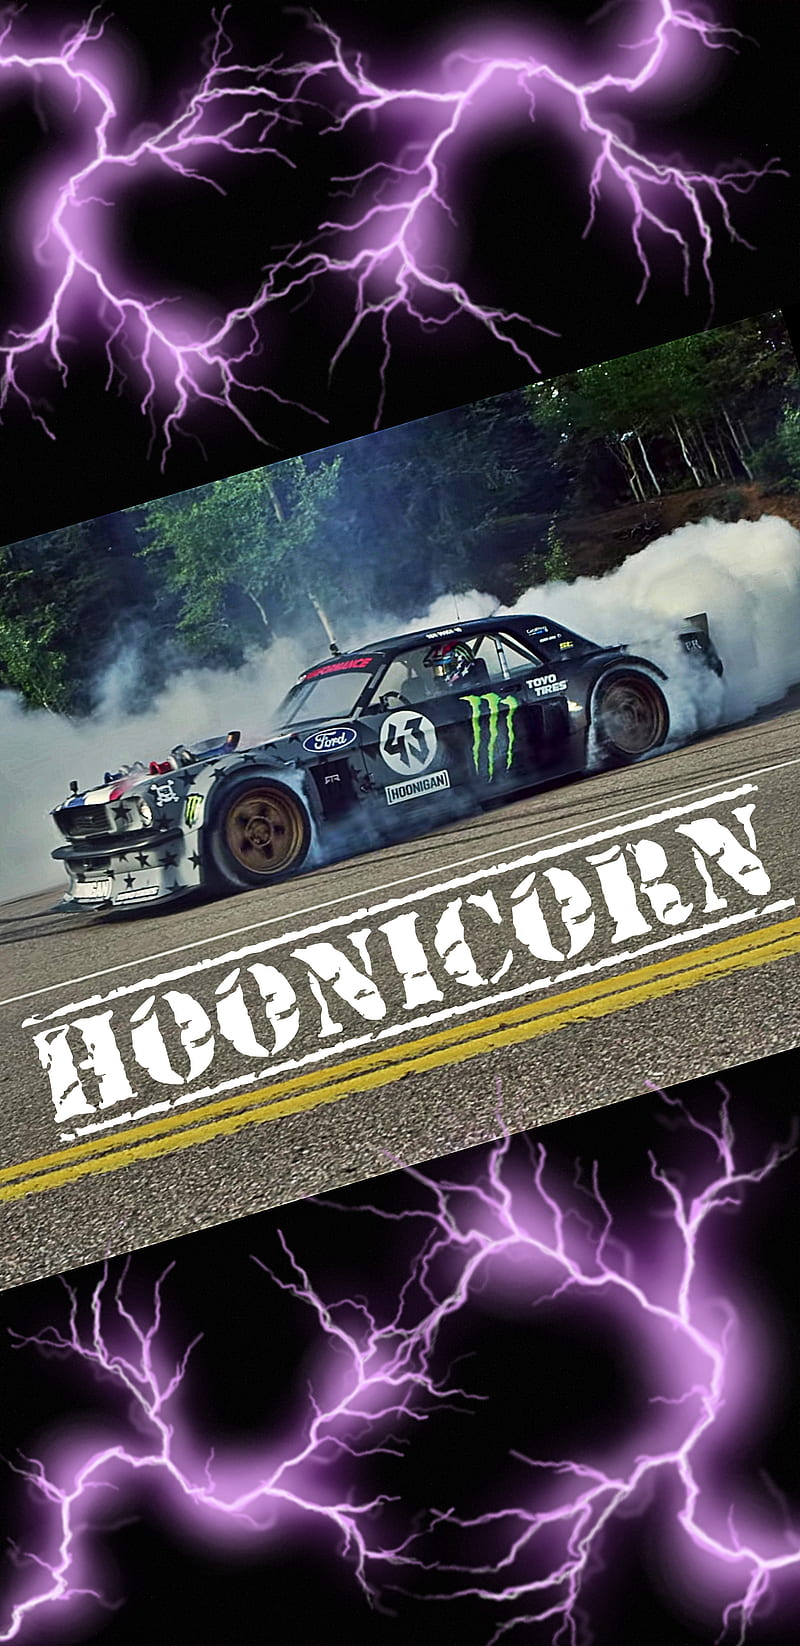 Hoonicorn - Finished Projects - Blender Artists Community